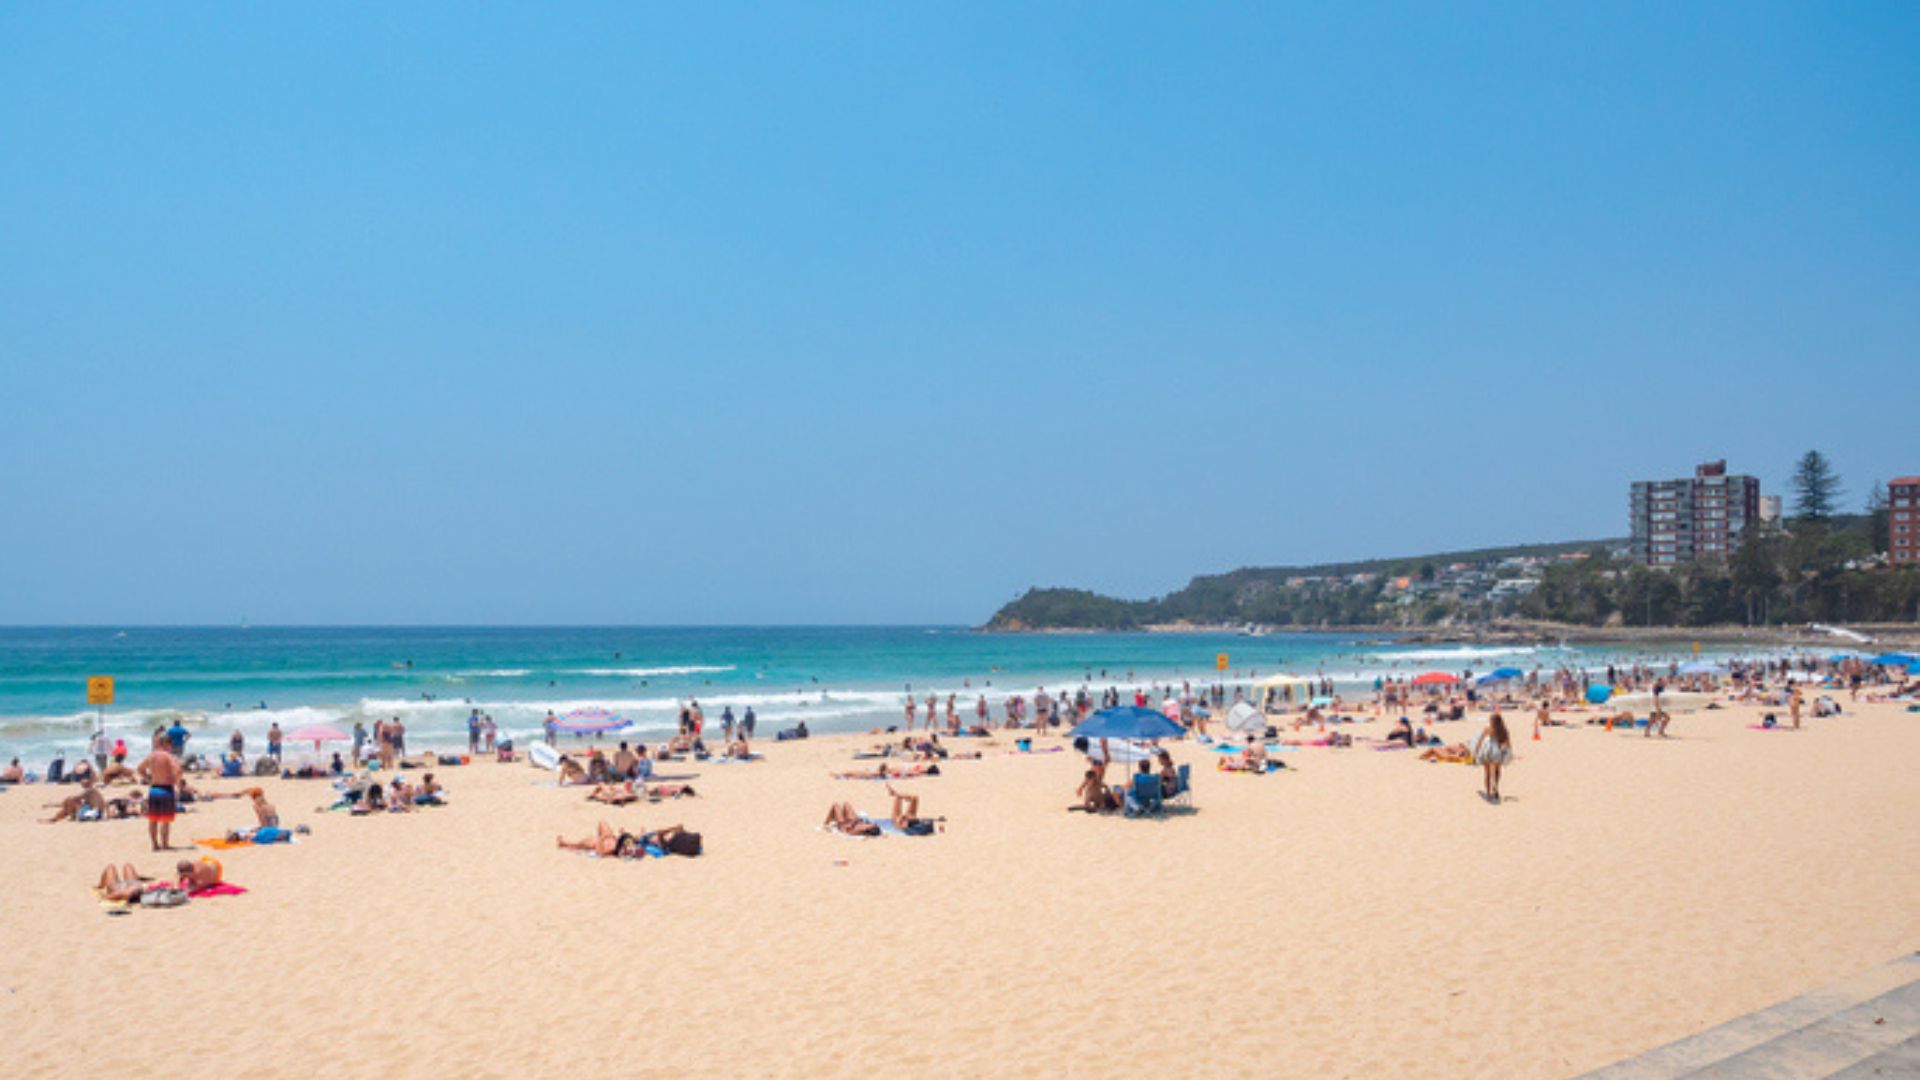 Freshwater Beach is the birthplace of surfing in Australia